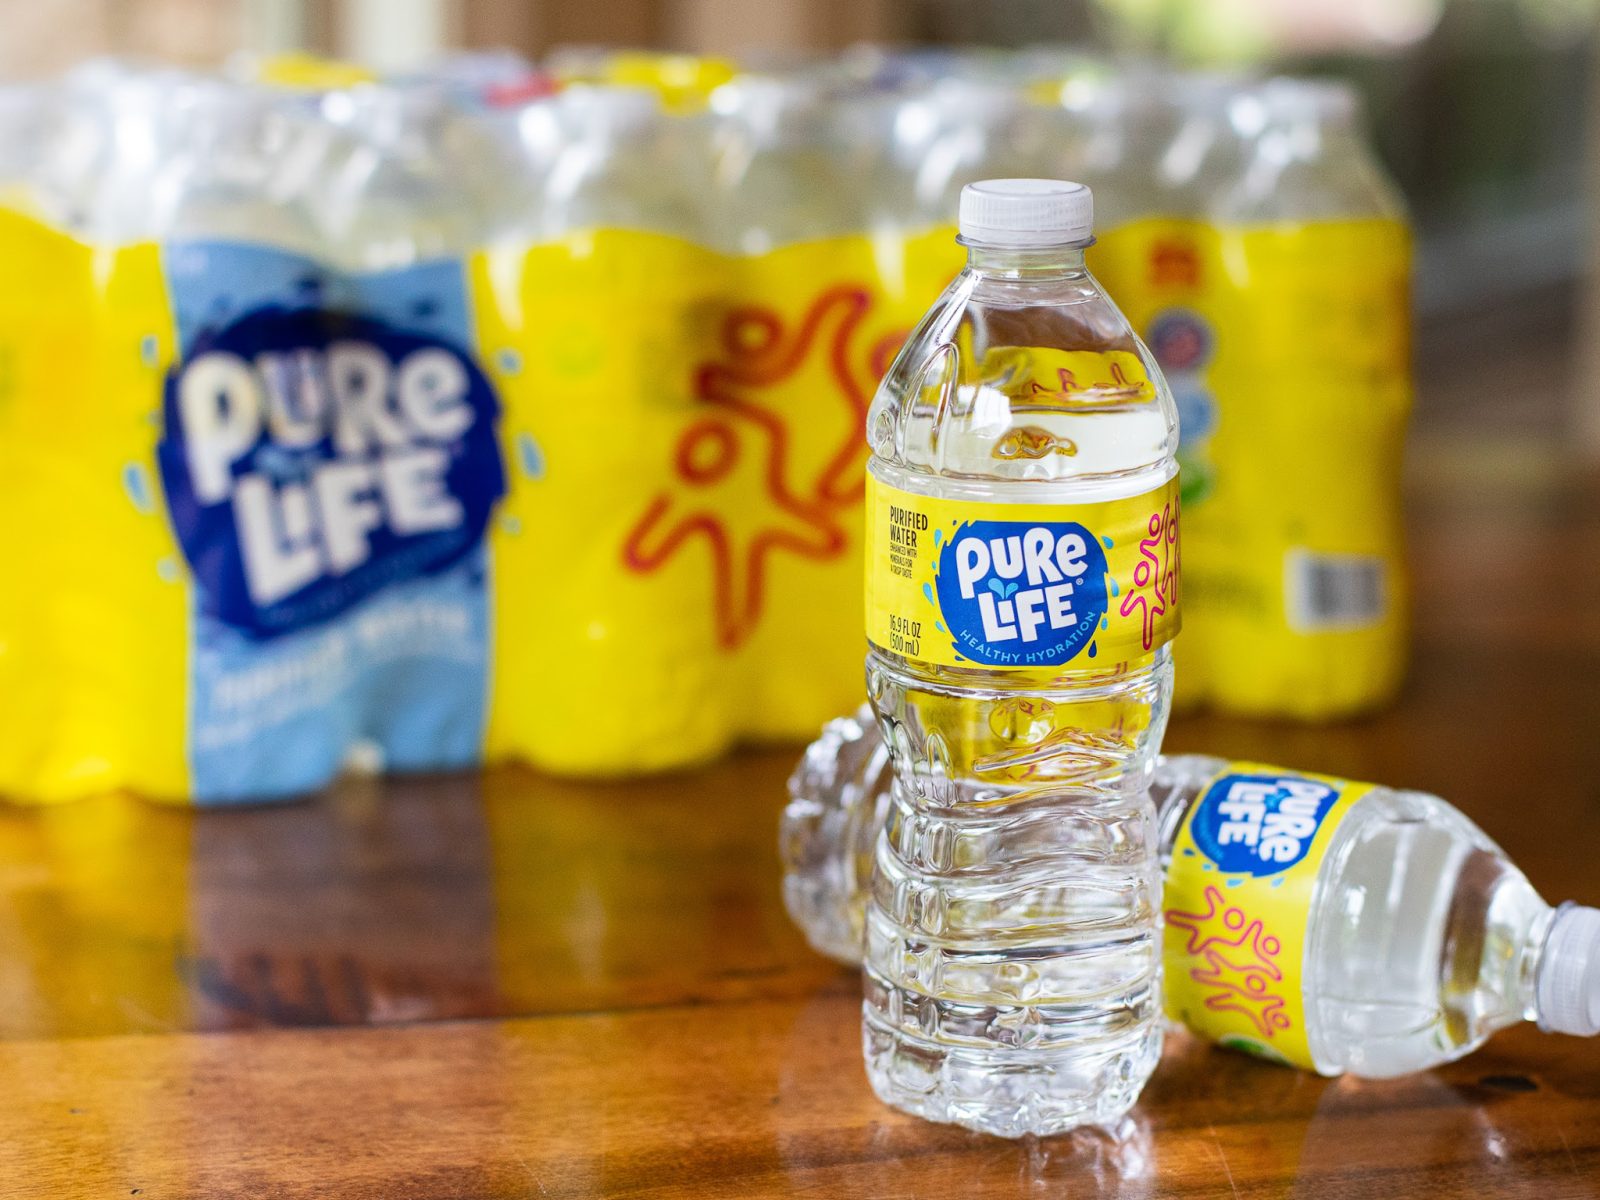 https://www.iheartkroger.com/wp-content/uploads/2022/07/Pure-Life-Water-pack-1600x1200.jpg